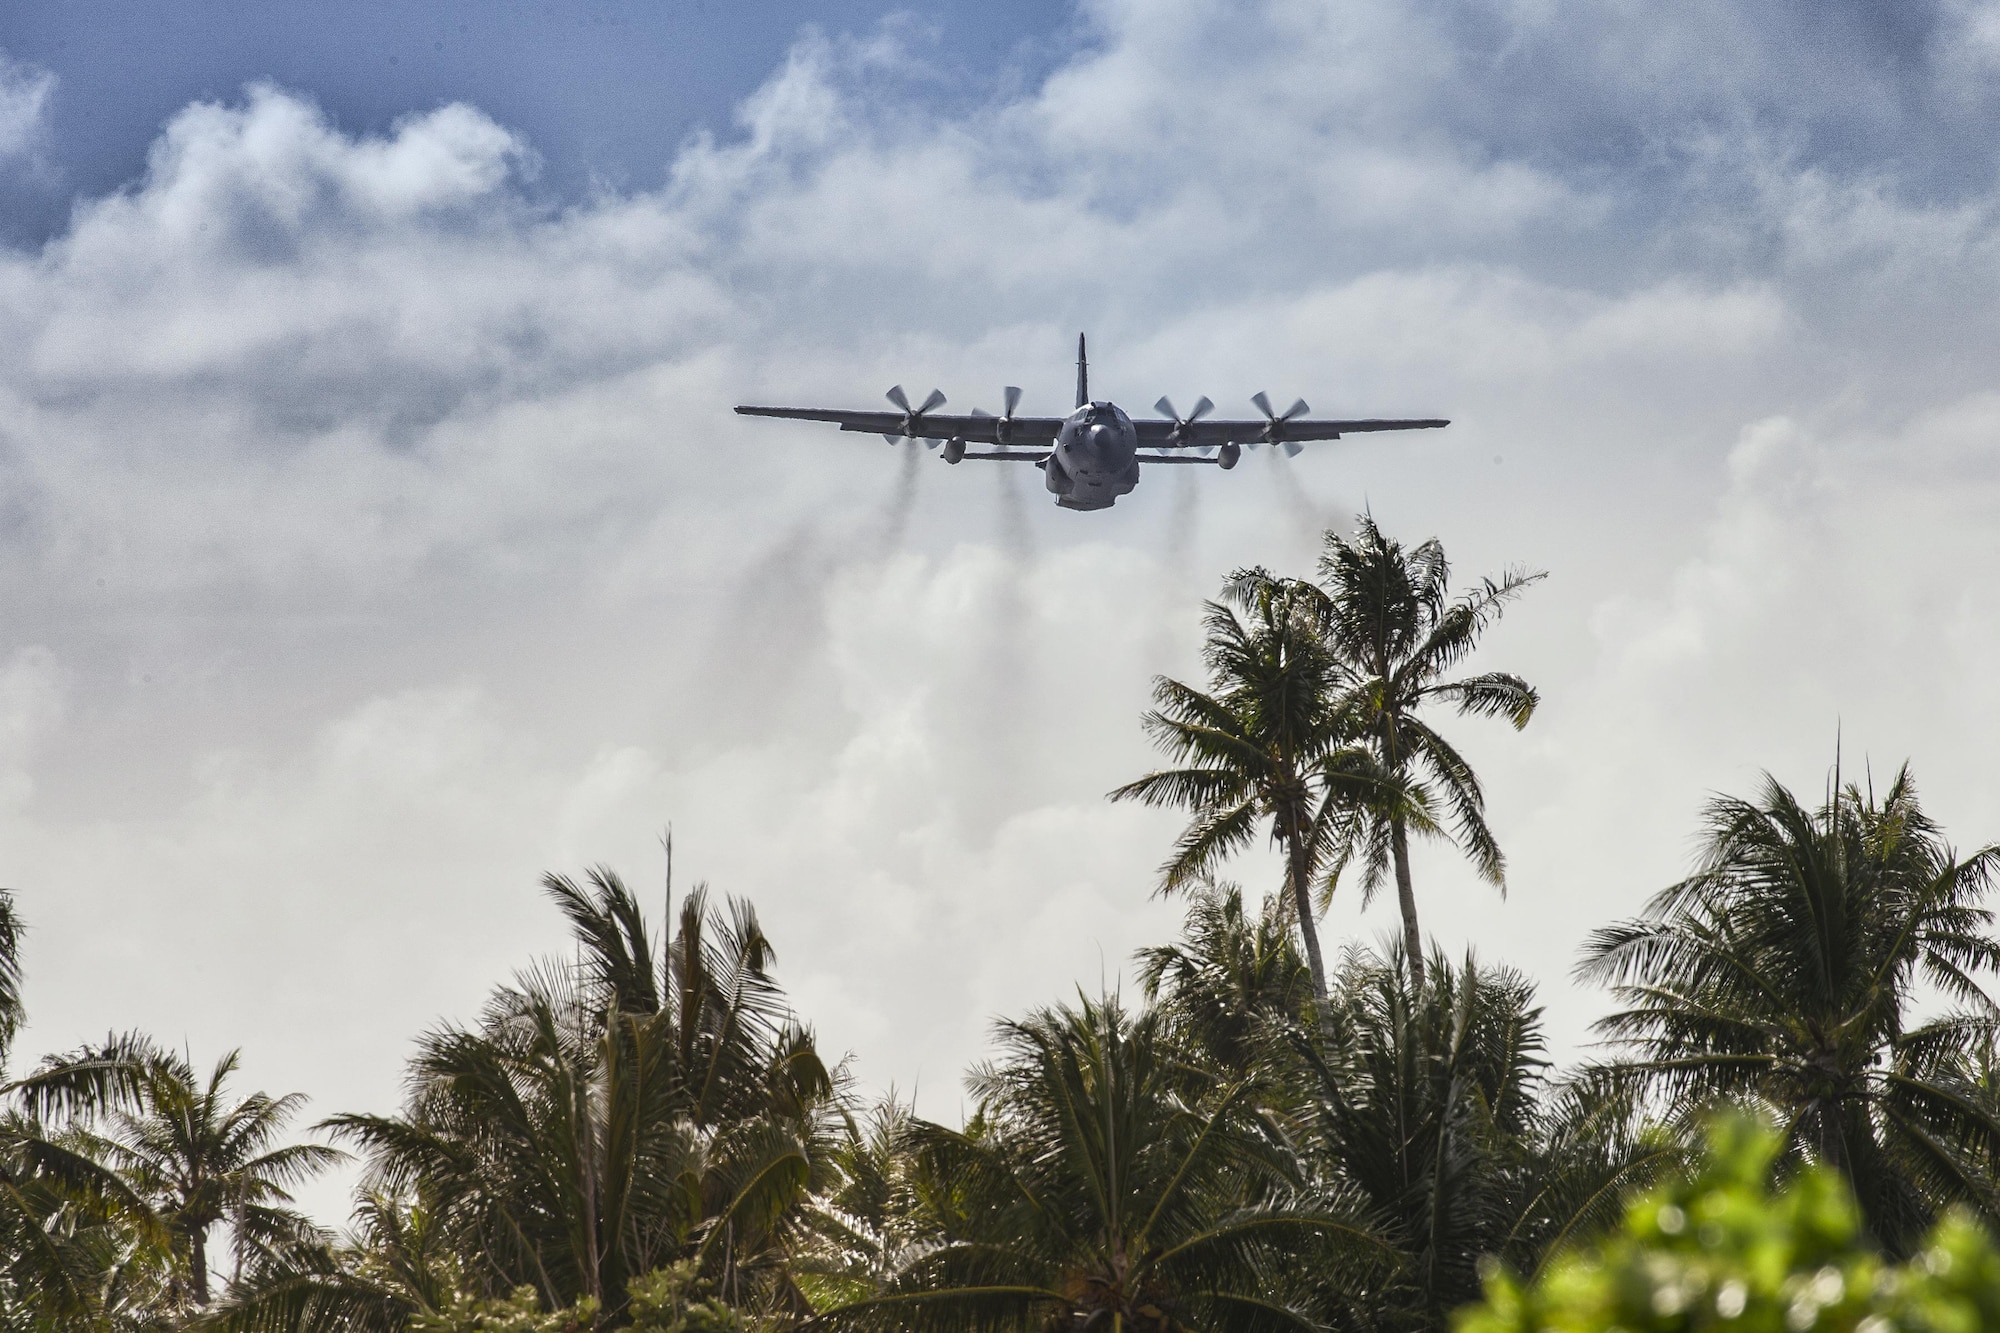 A C-130 Hercules from the 36th Airlift Squadron flies over Fais Island, Dec. 8, 2015, during Operation Christmas Drop 2015. Airmen from the Yokota delivered over 800 pounds of supplies to the island of Fais during Operation Christmas Drop 2015. This year marks the first ever trilateral Operation Christmas Drop where the U.S. Air Force, Japan Air Self-Defense Force and the Royal Australian Air Force work together to provide critical supplies to 56 Micronesian Islands. (U.S. Air Force photo by Osakabe Yasuo/Released)